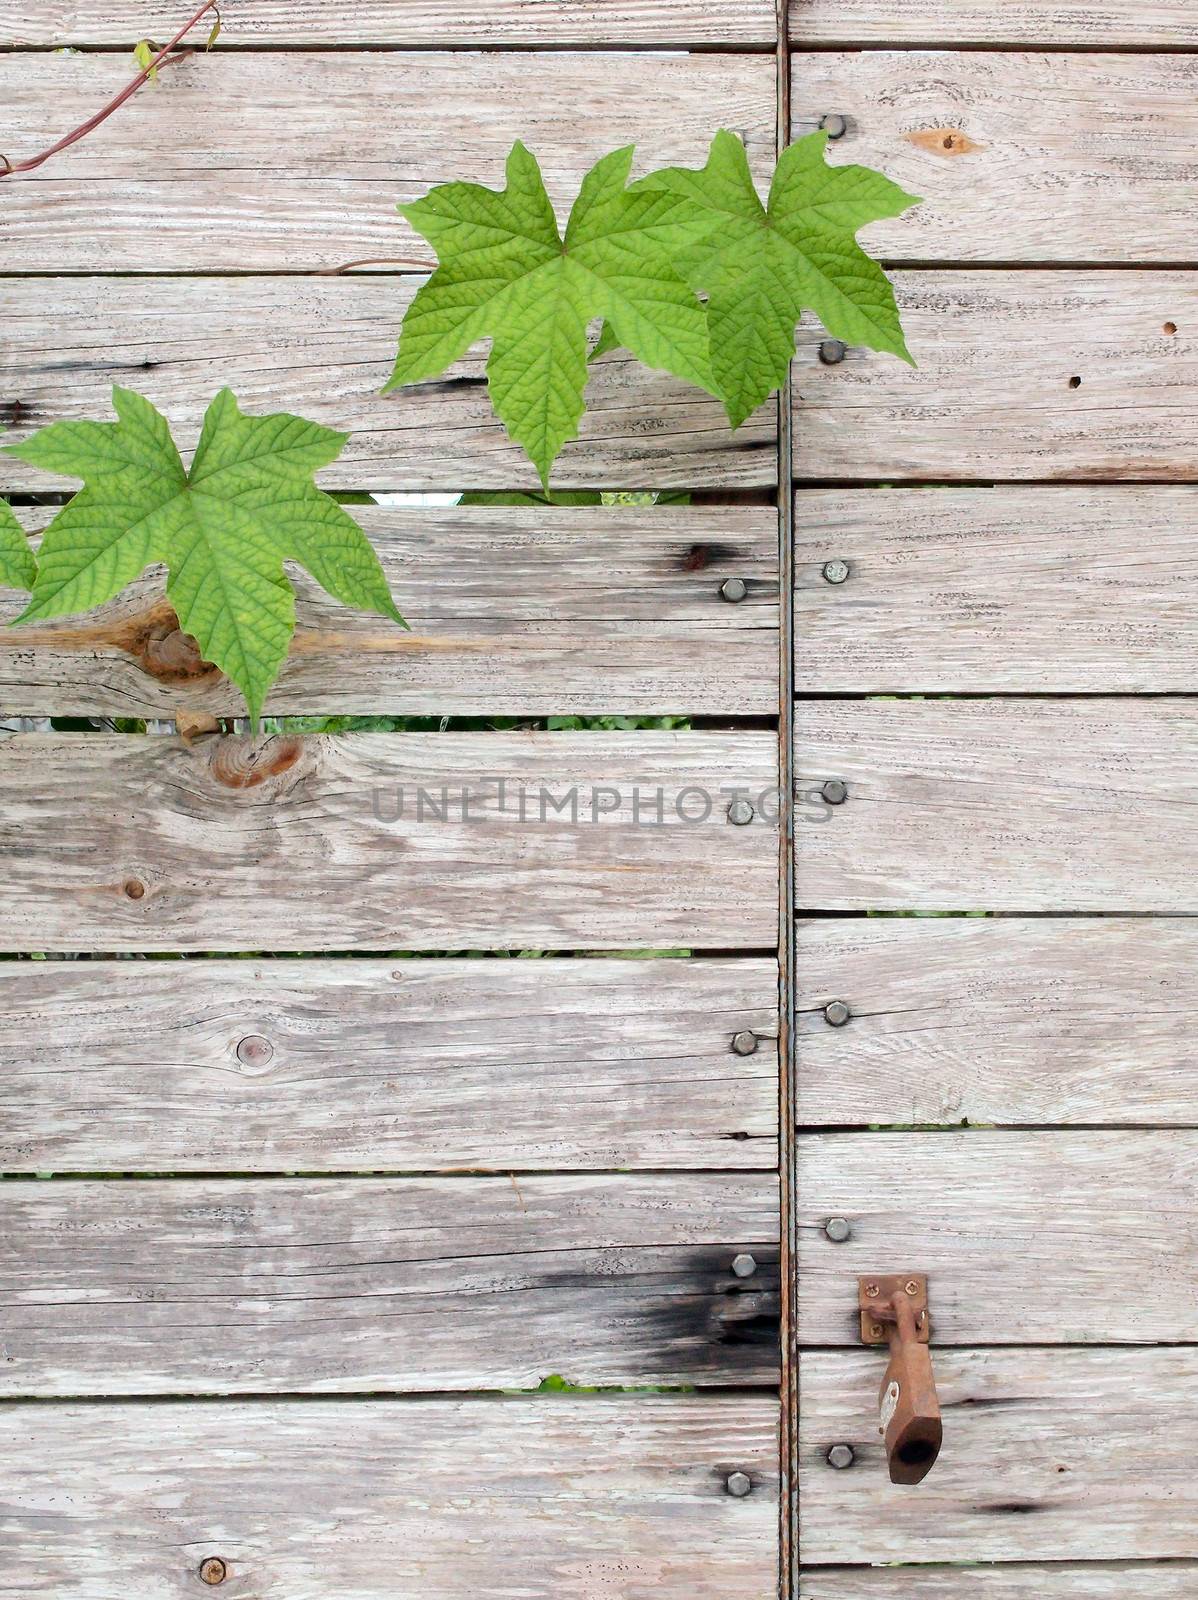 Wood Texture With Leaves by olovedog